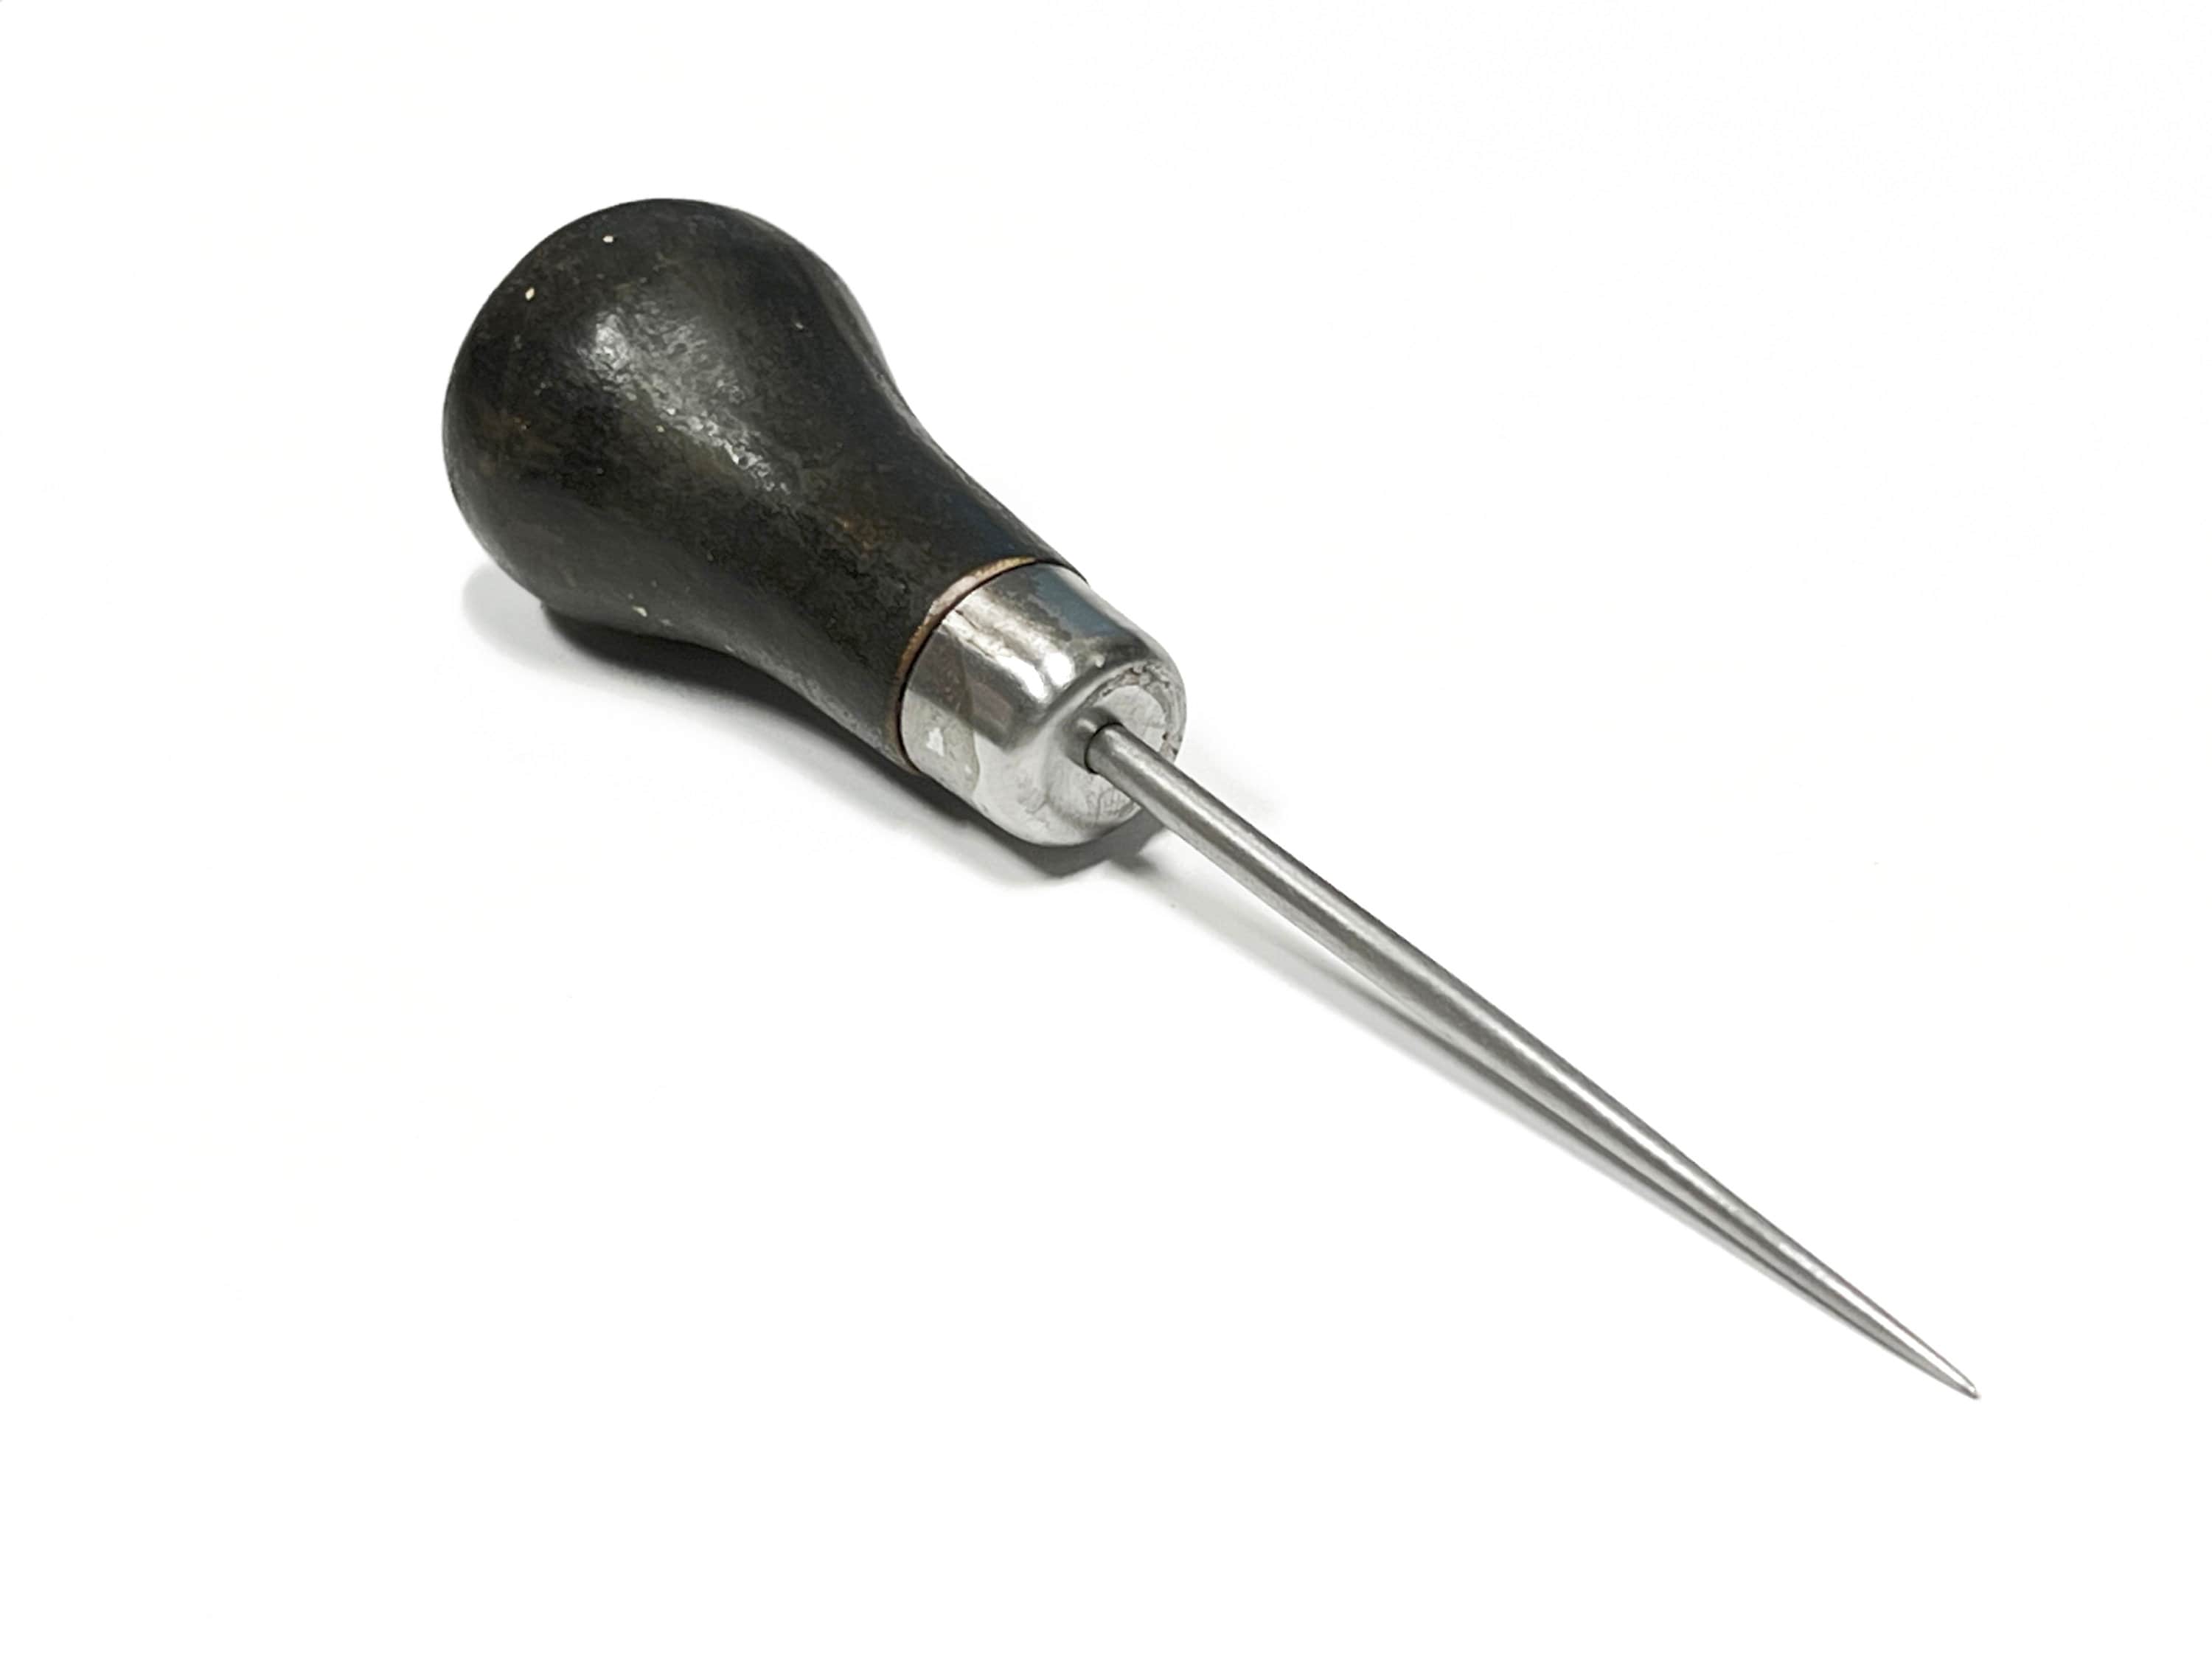 Awl Tool Sewing, Stitching Awl Fine Workmanship High Hardness steel for  Leather Punching for Household